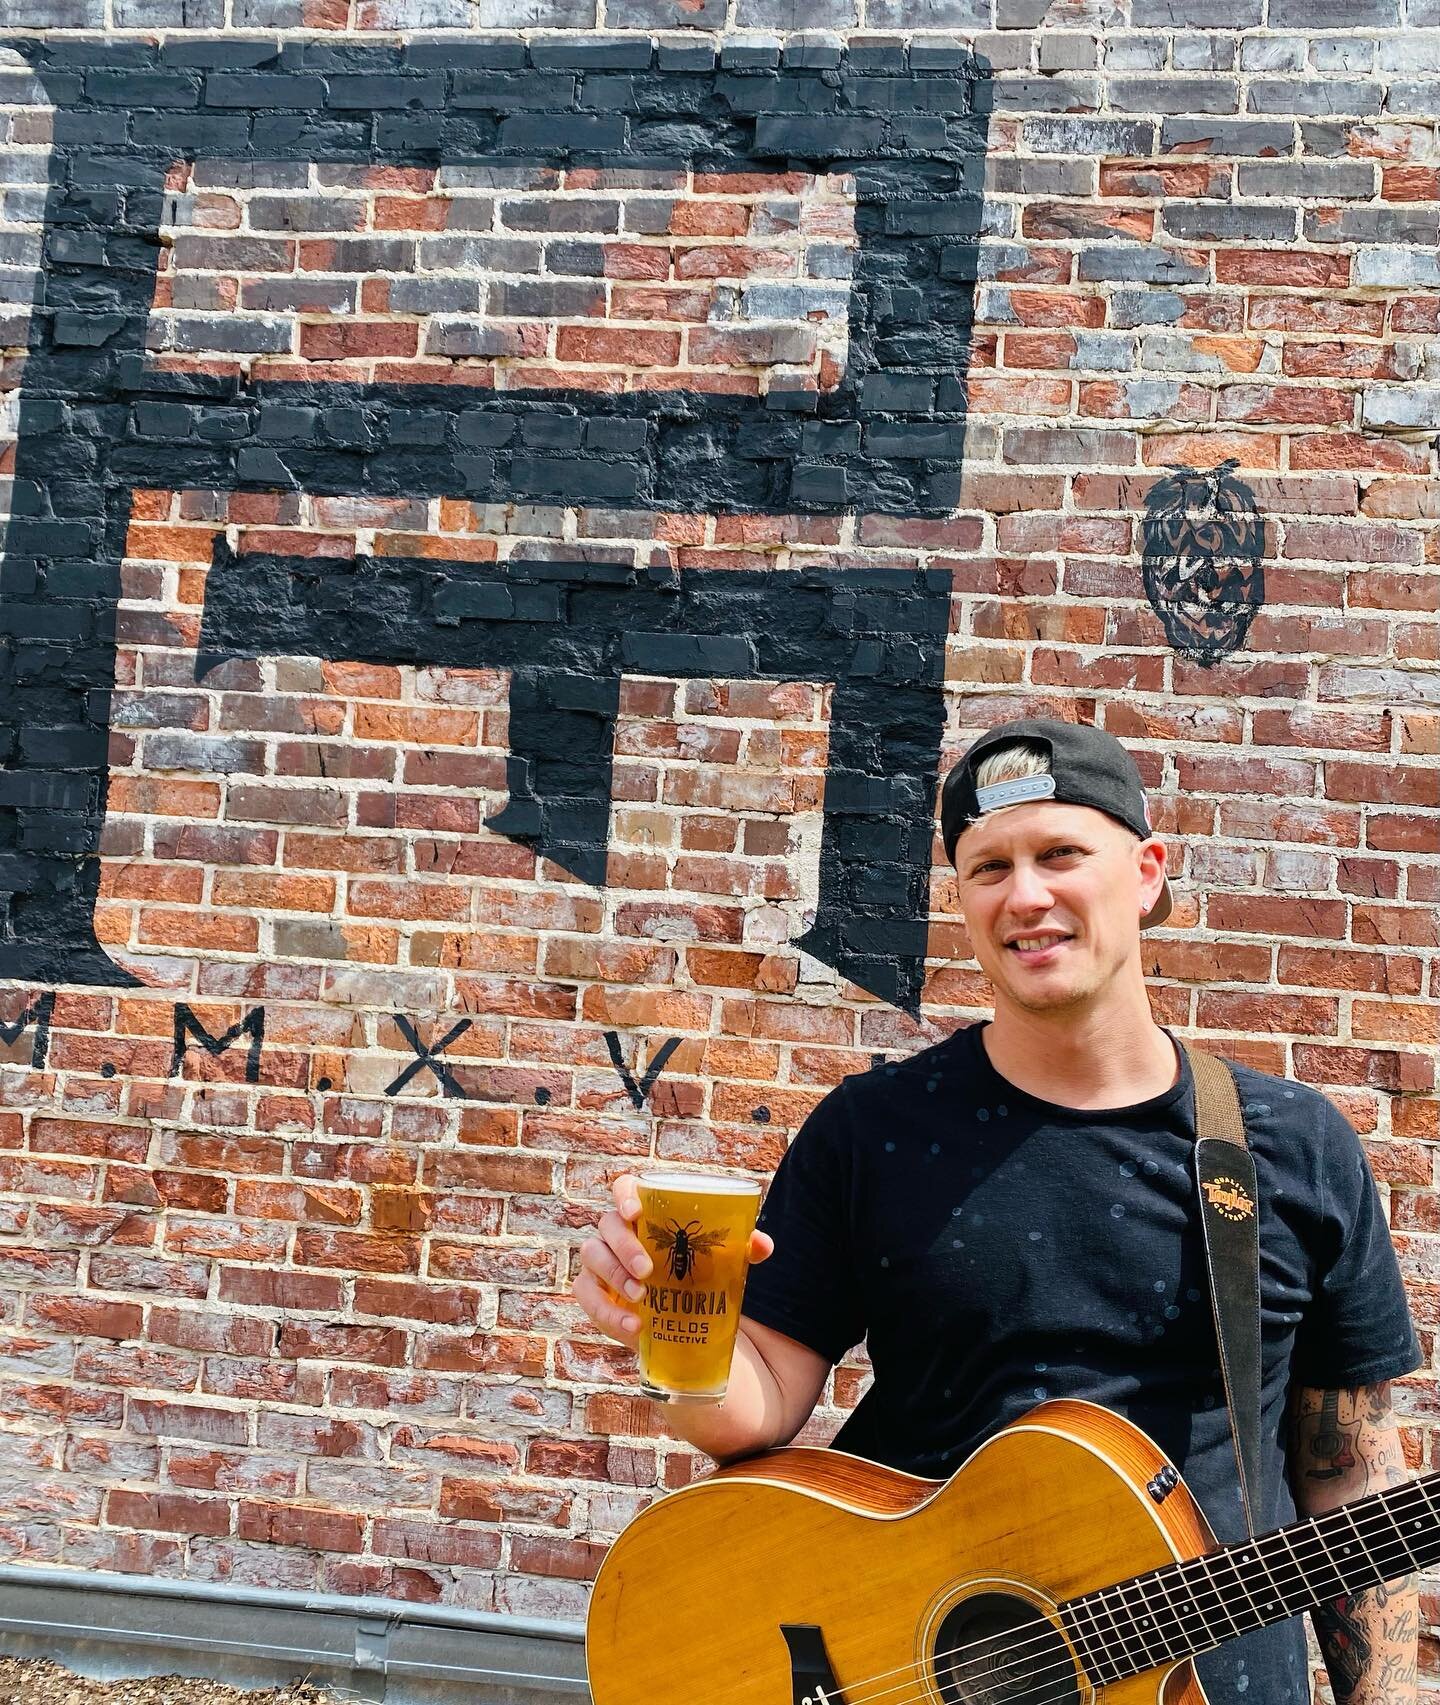 Looking for some happy vibes? @jimmymowery tour has found him back in @downtownalbanygeorgia this afternoon &amp; cold beer is flowin! Come grab a bite &amp; a pint and unwind with us.

Jimmy Mowery grew up in Altoona, Pennsylvania. At age eleven, af